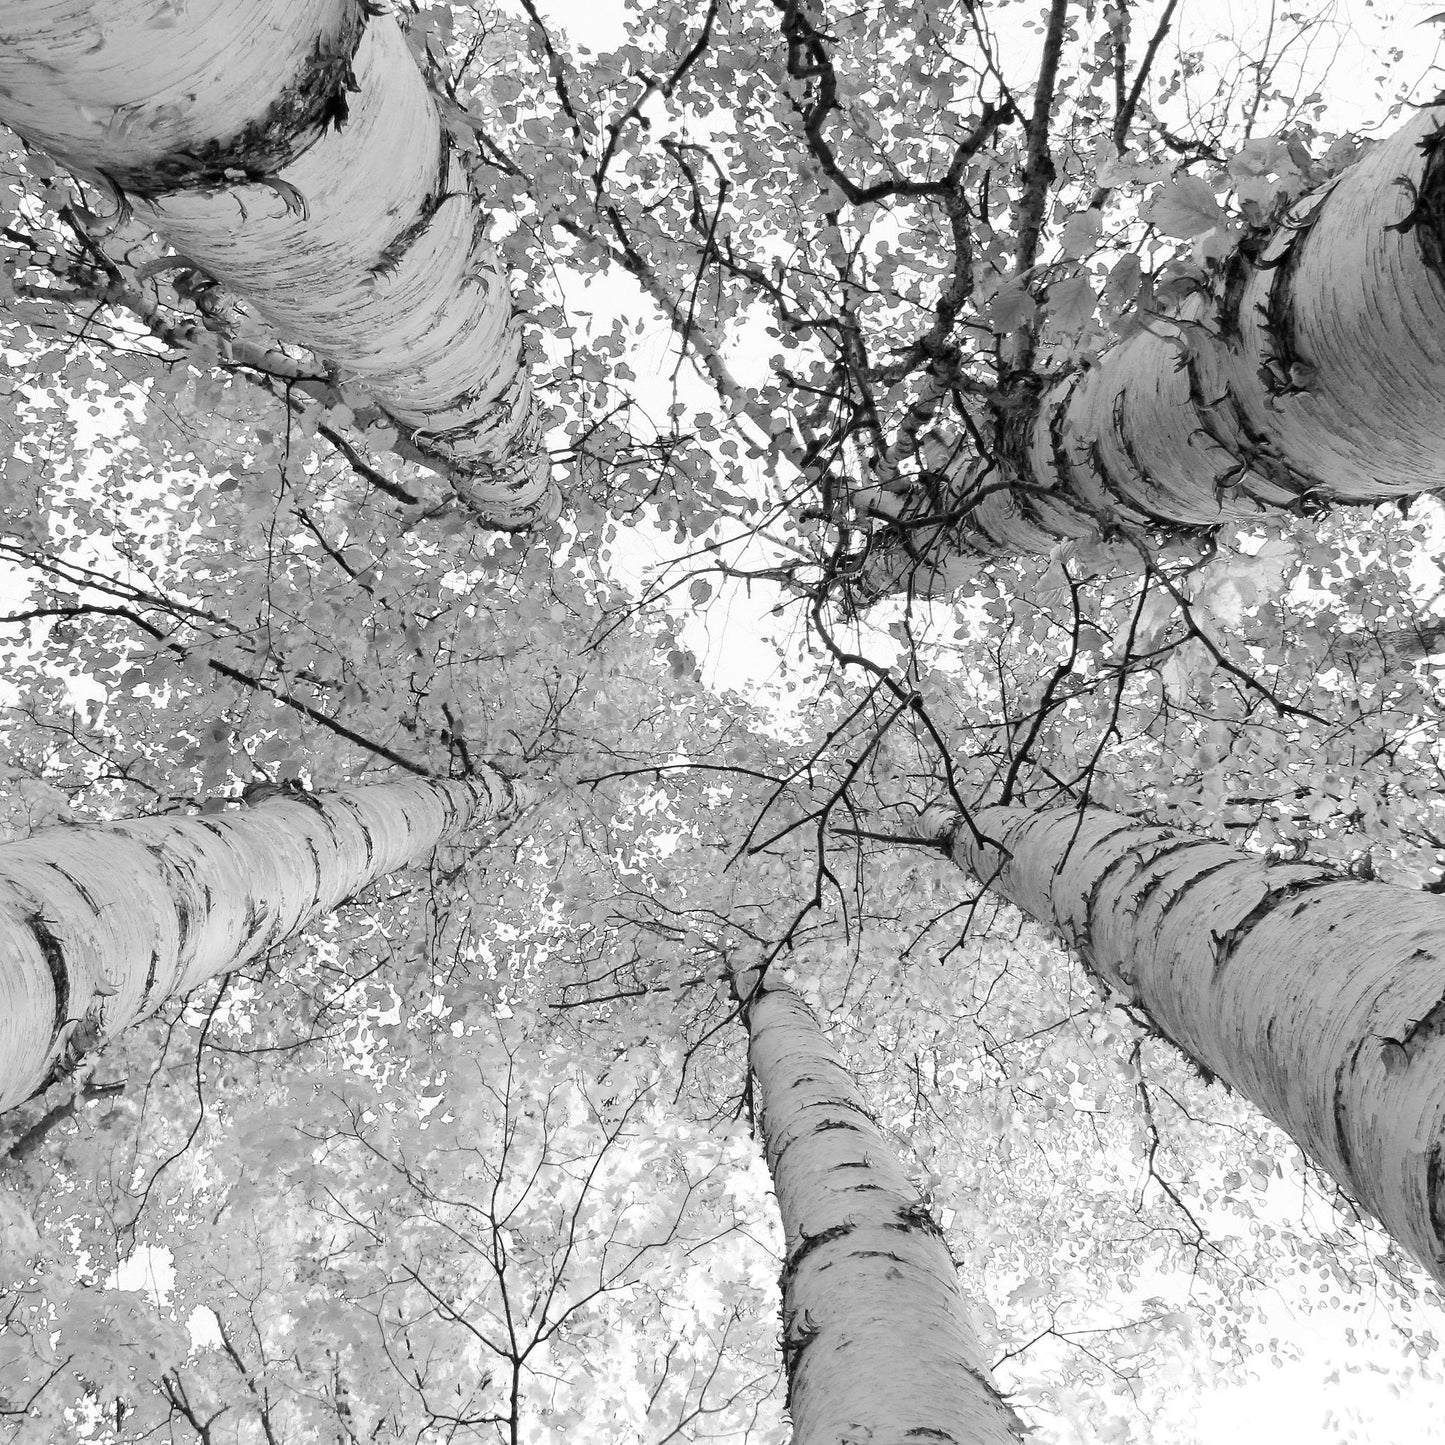 Birch Trees photo print, tree canopy wall art decor, black and white photography, birch tree picture, paper or canvas, 5x7 8x10 11x14 32x48"